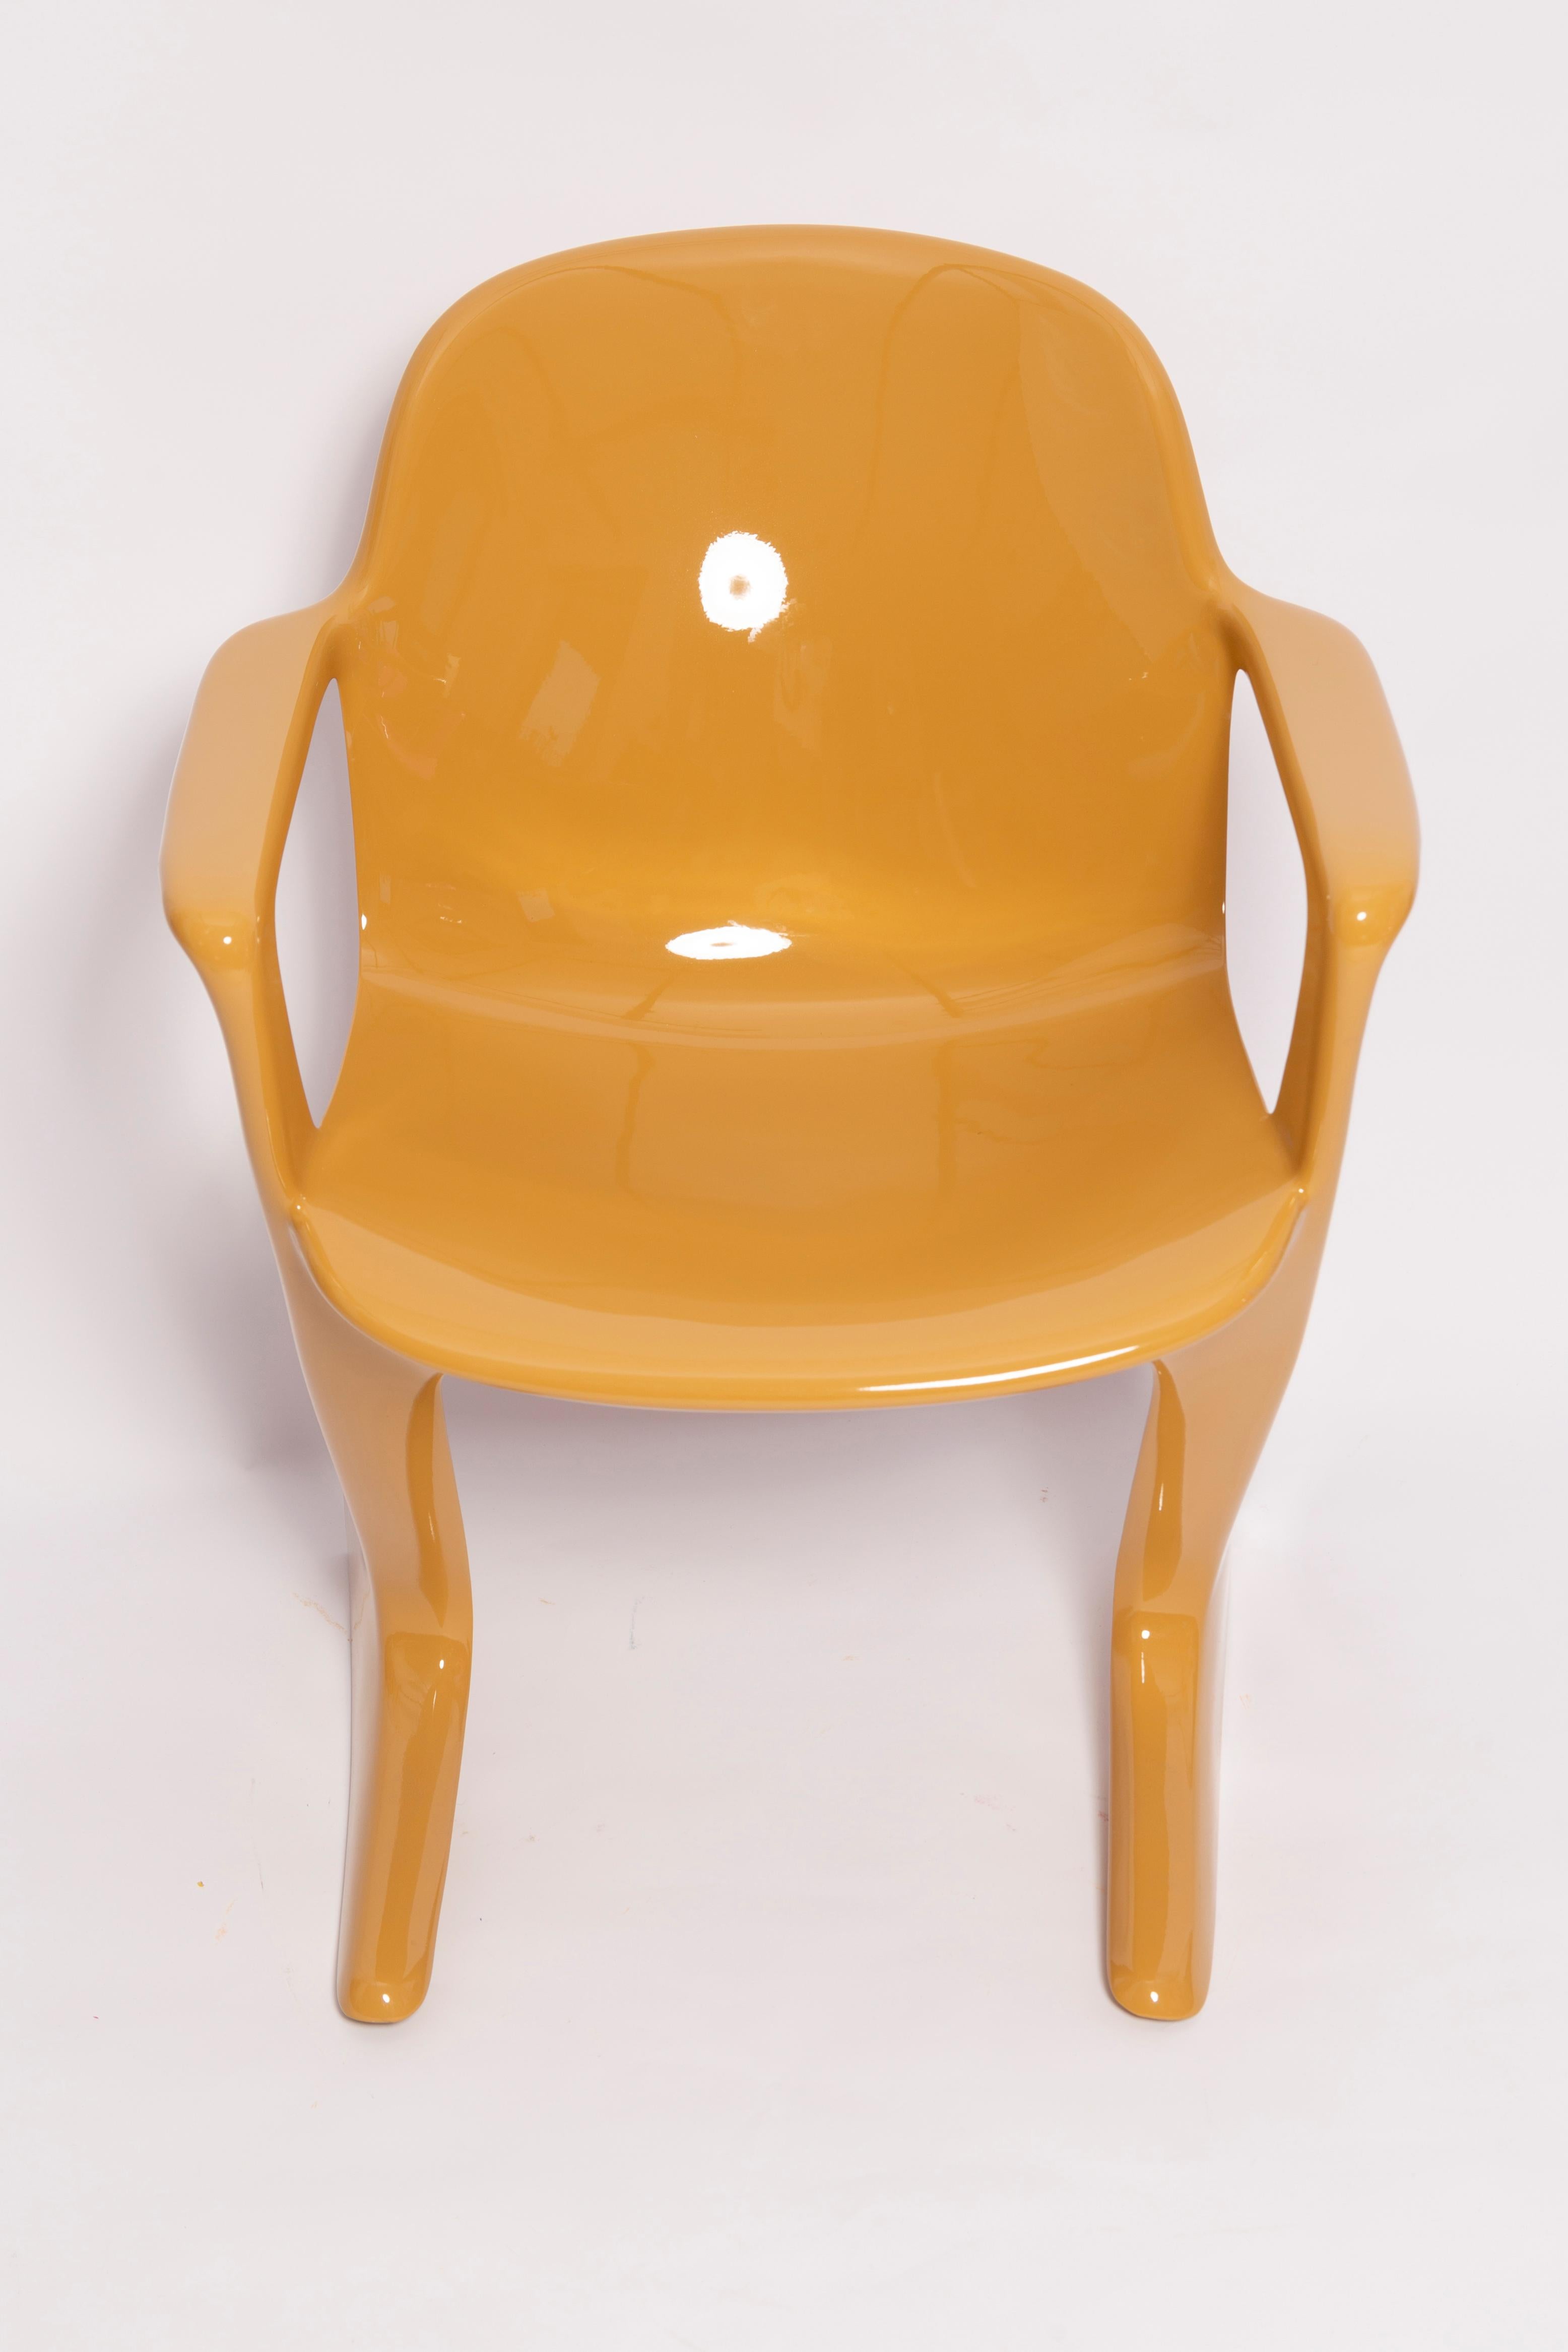 Mid-Century Sand Beige Kangaroo Chair Designed by Ernst Moeckl, Germany, 1968 For Sale 1